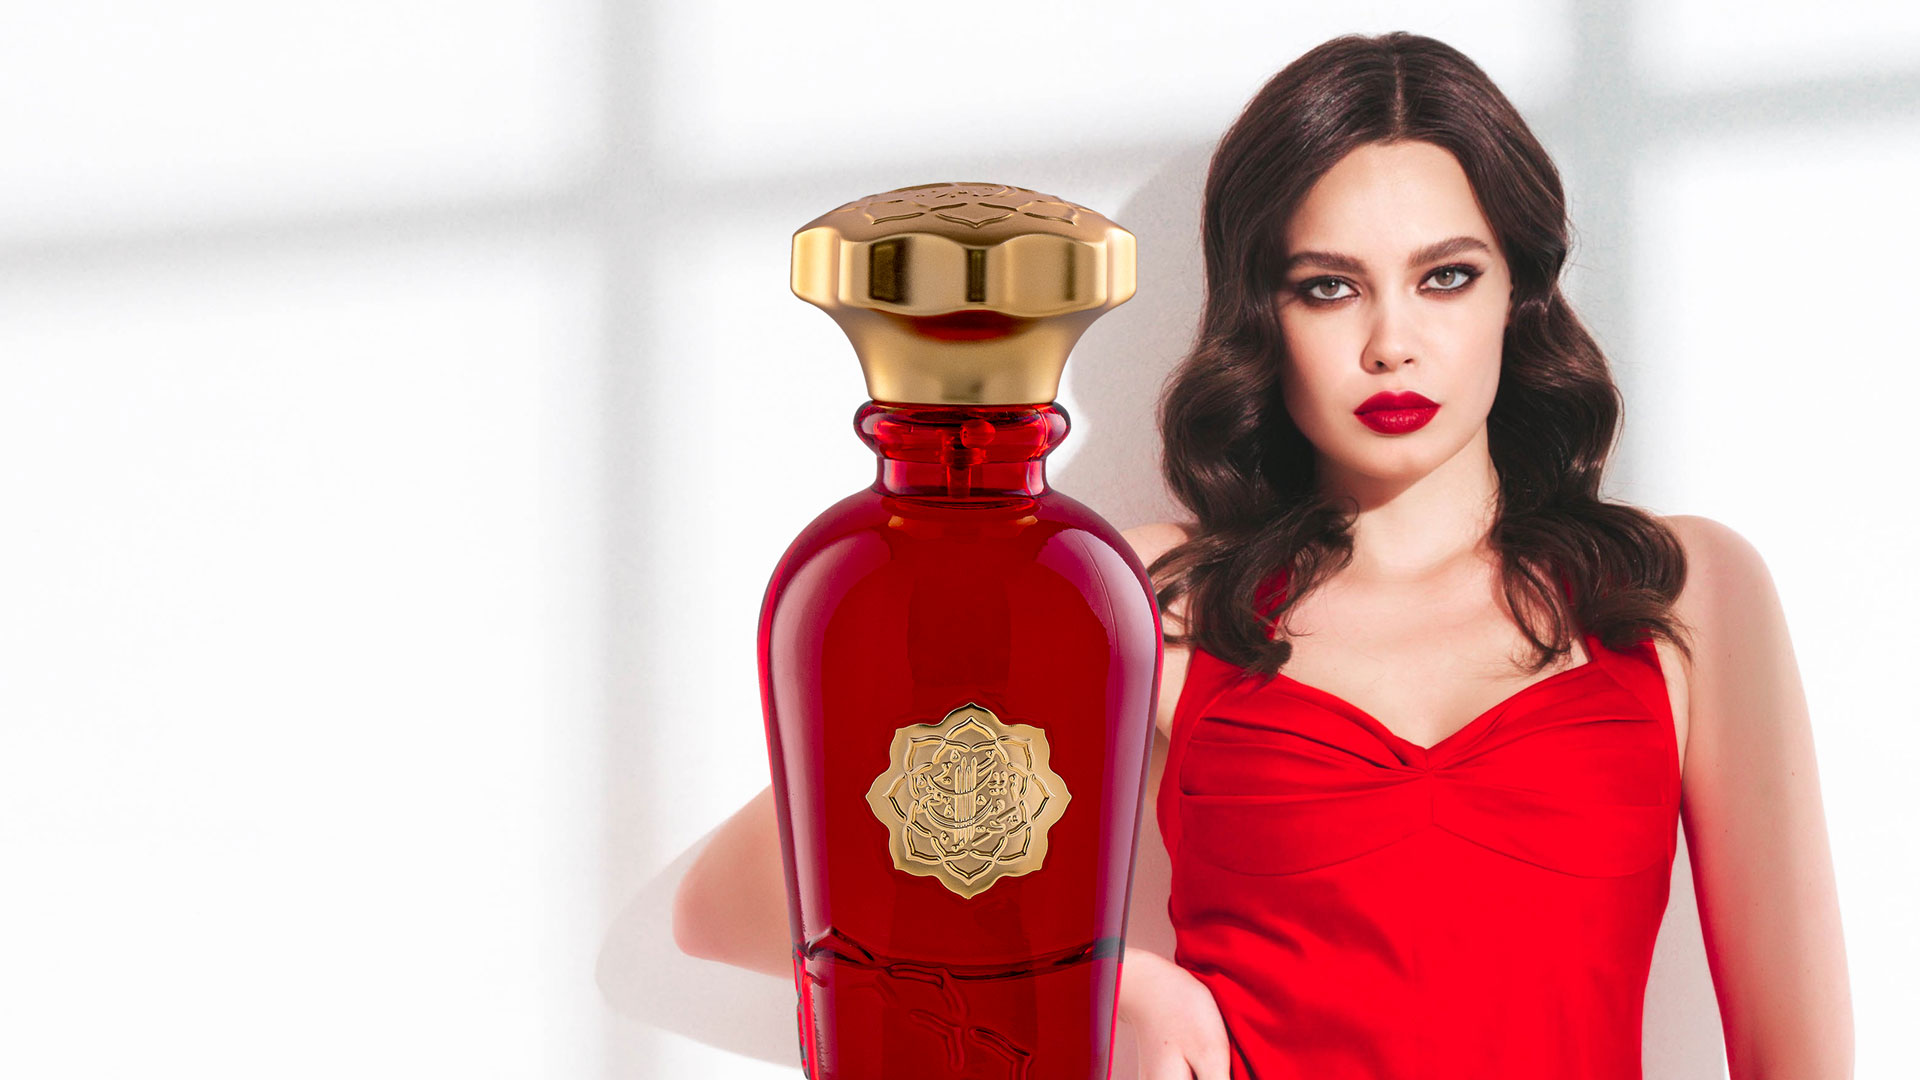 Ignite Your Passion with the First-Copy Givenchy Women's Perfumes